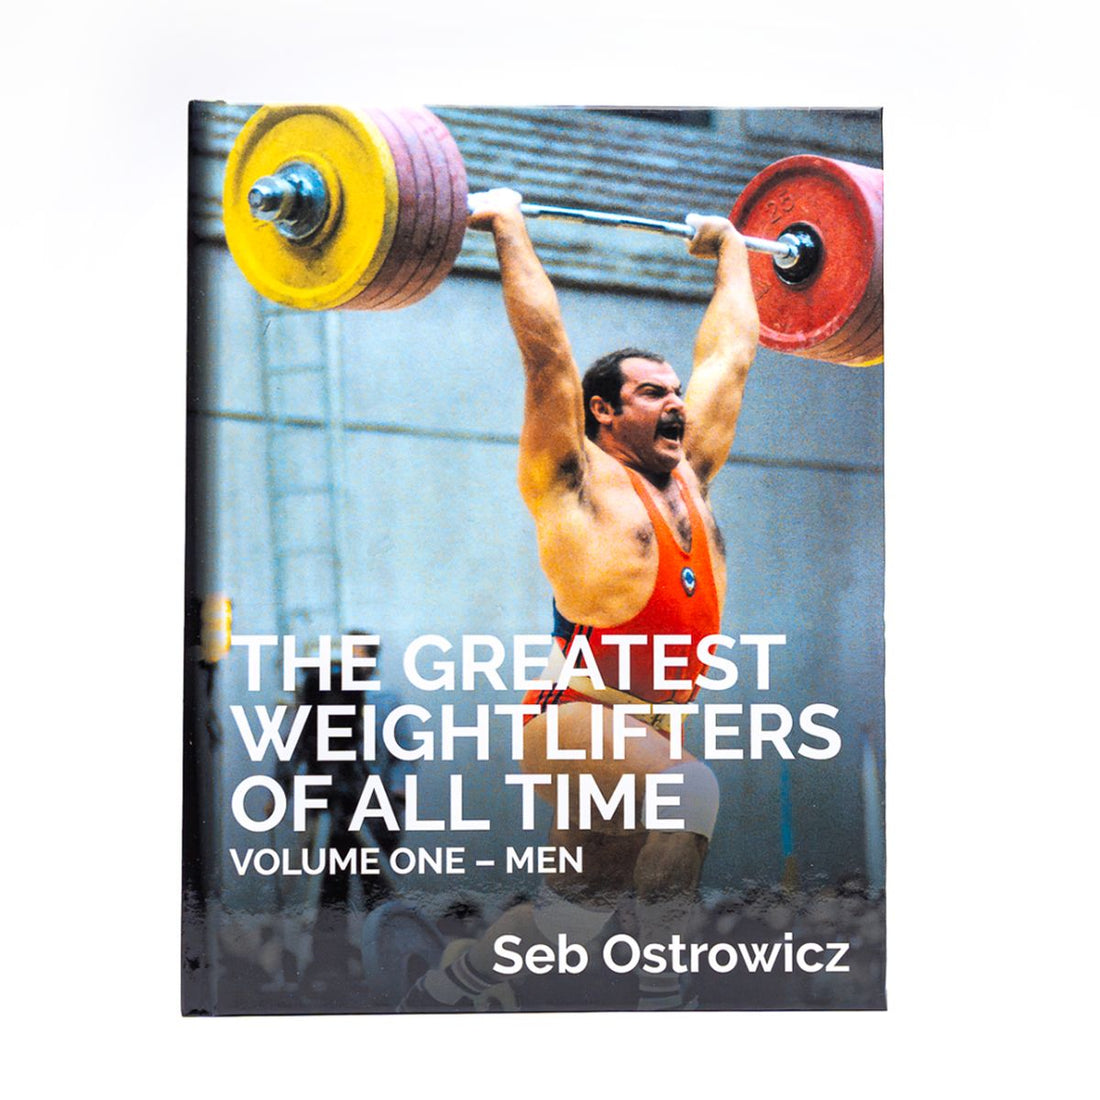 The Greatest Weightlifters of All Time Vol 1 - Men